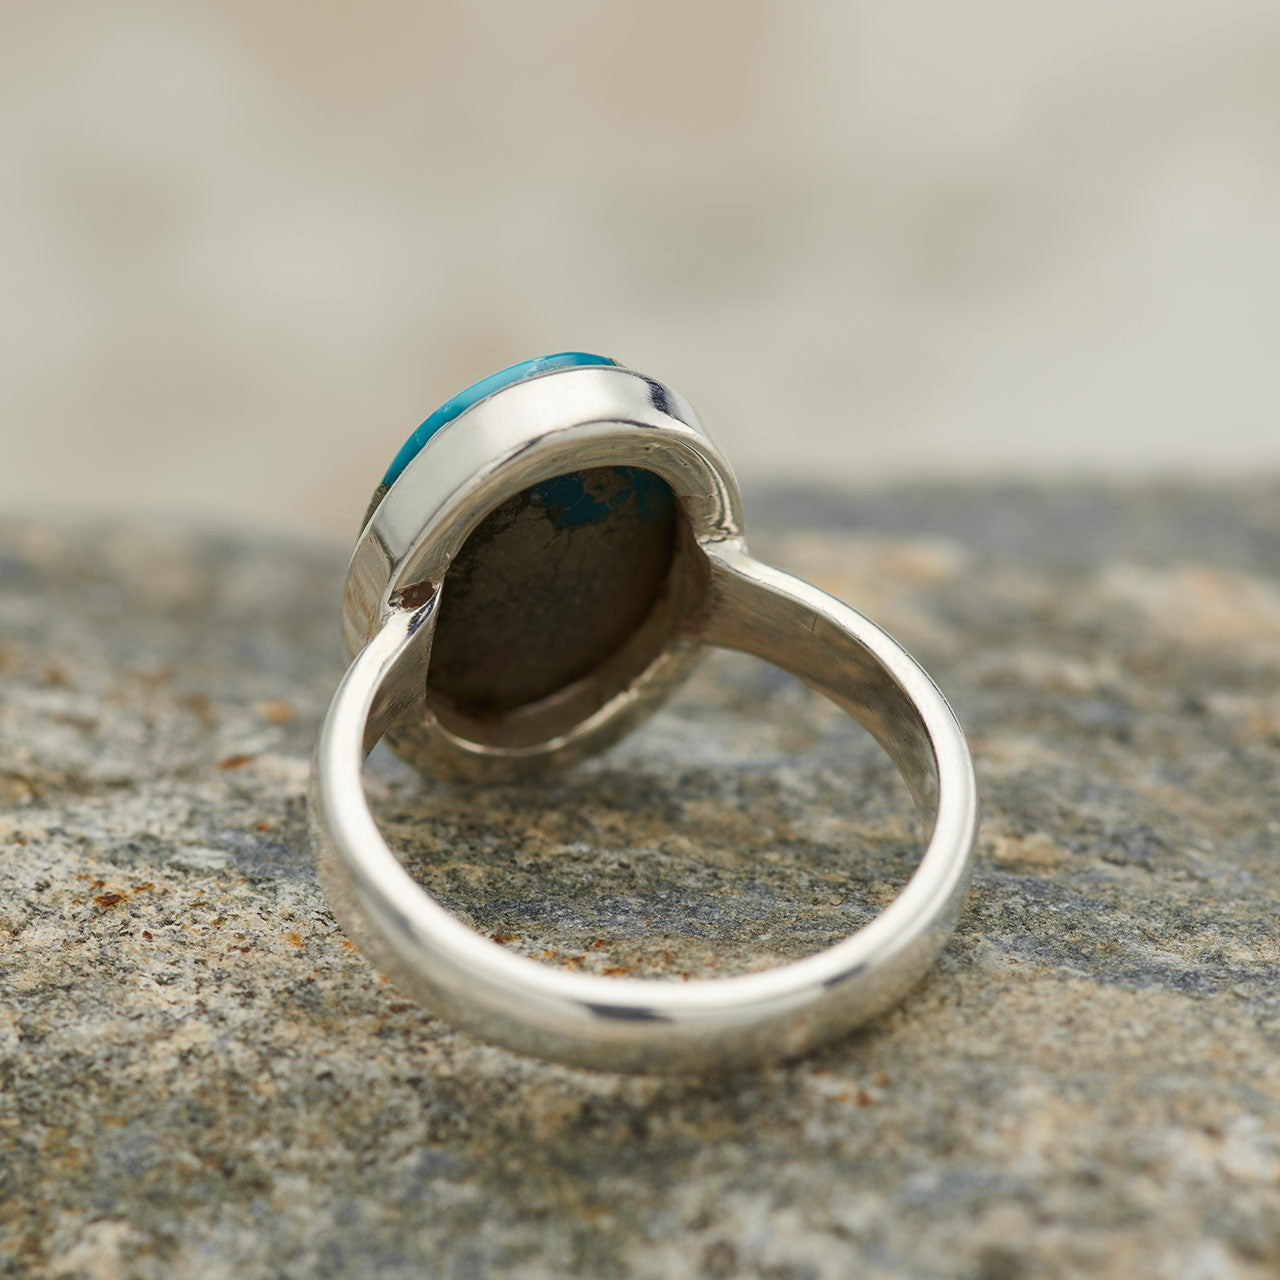 NATURAL IRANIAN TURQUOISE RING STERLING SILVER